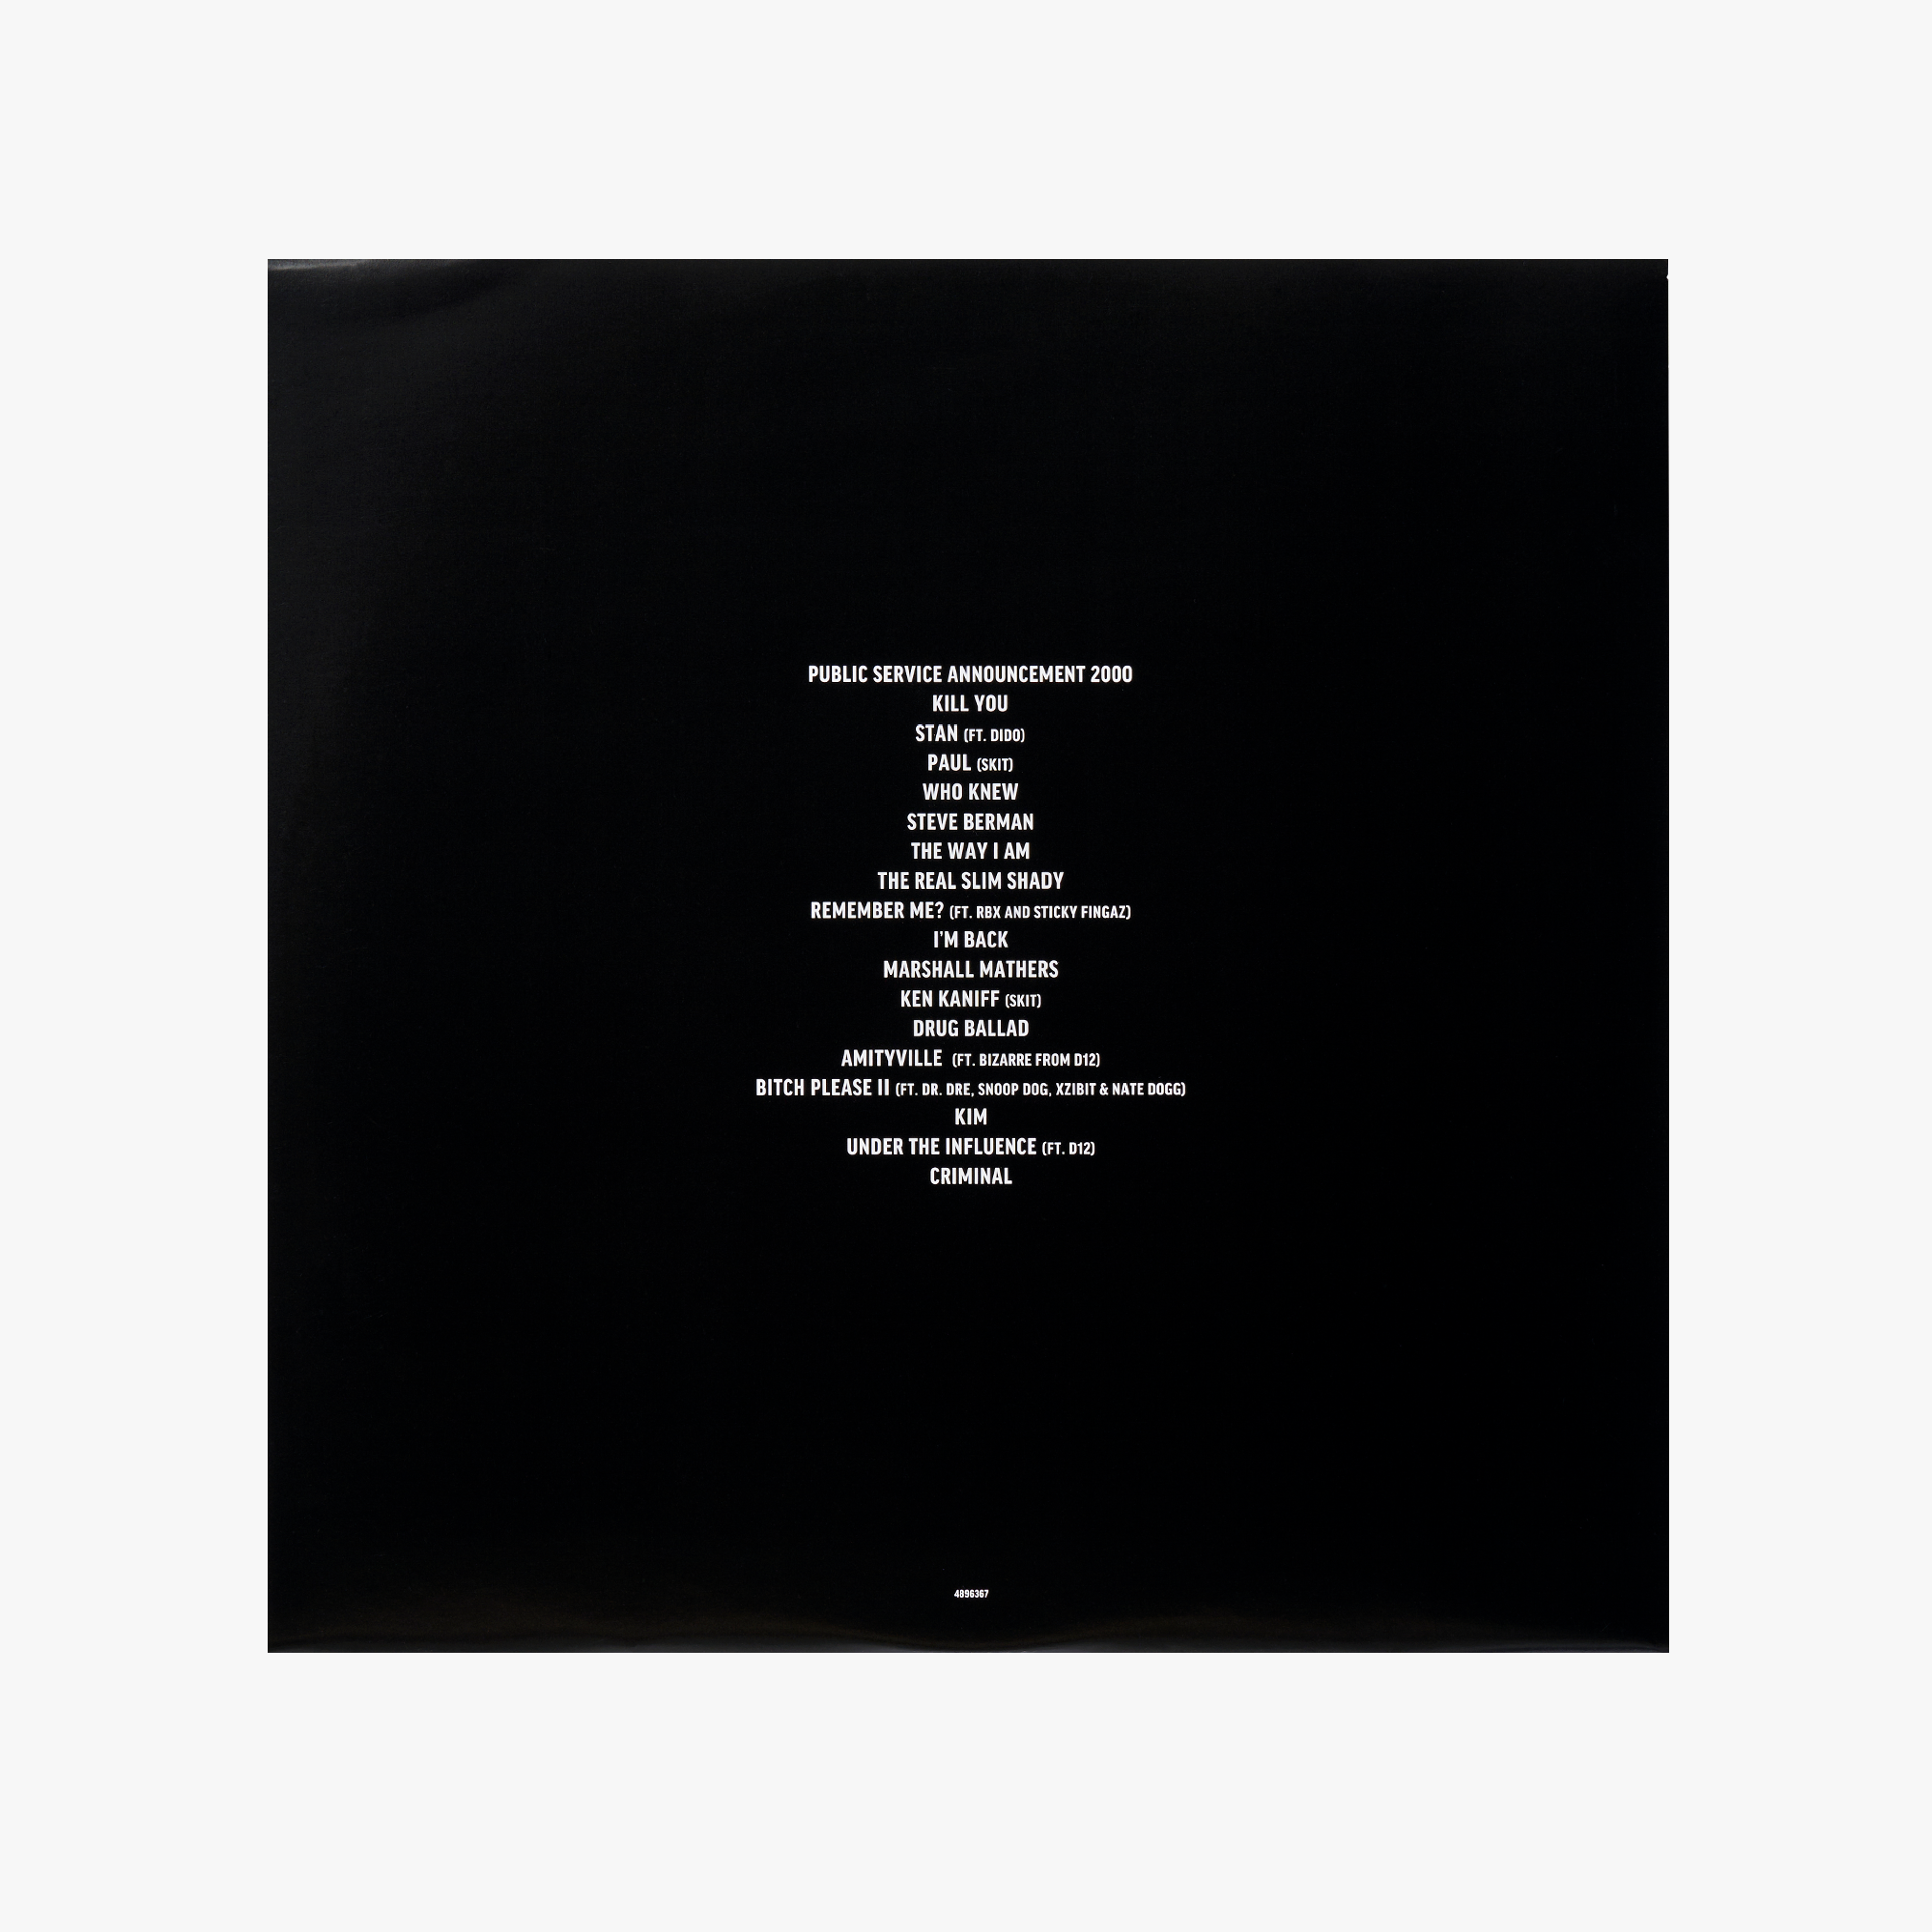 Alternate View 1 of Eminem - The Marshall Mathers LP by Damien Hirst Gallery Picture